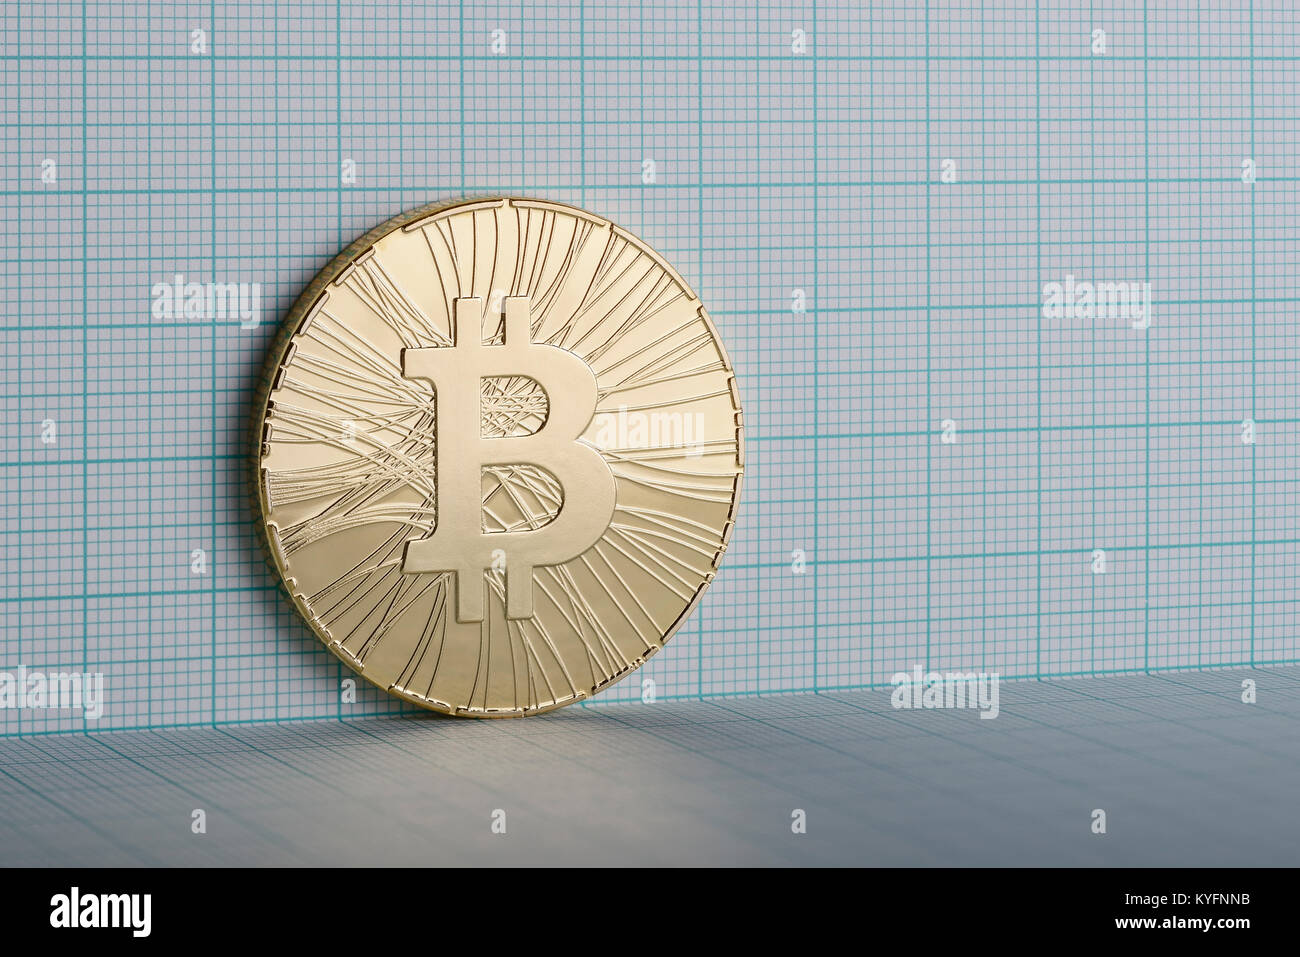 Gold coloured Bitcoin coin on graph paper Stock Photo